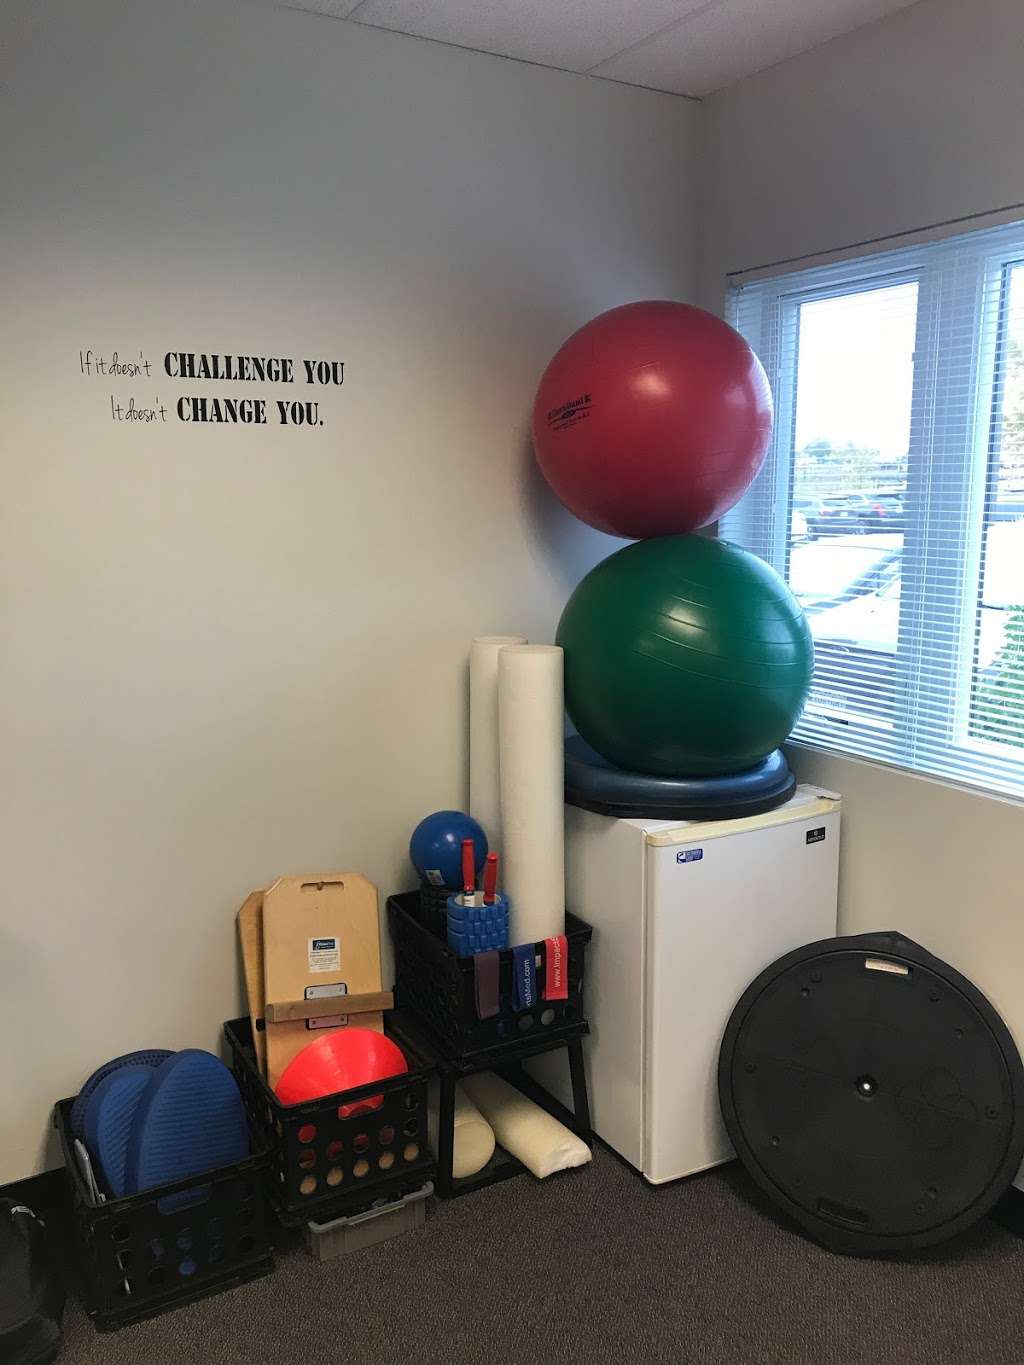 Bodywise Physical Therapy | 3305 W 144th Ave Suite 104, Broomfield, CO 80023 | Phone: (303) 444-2529